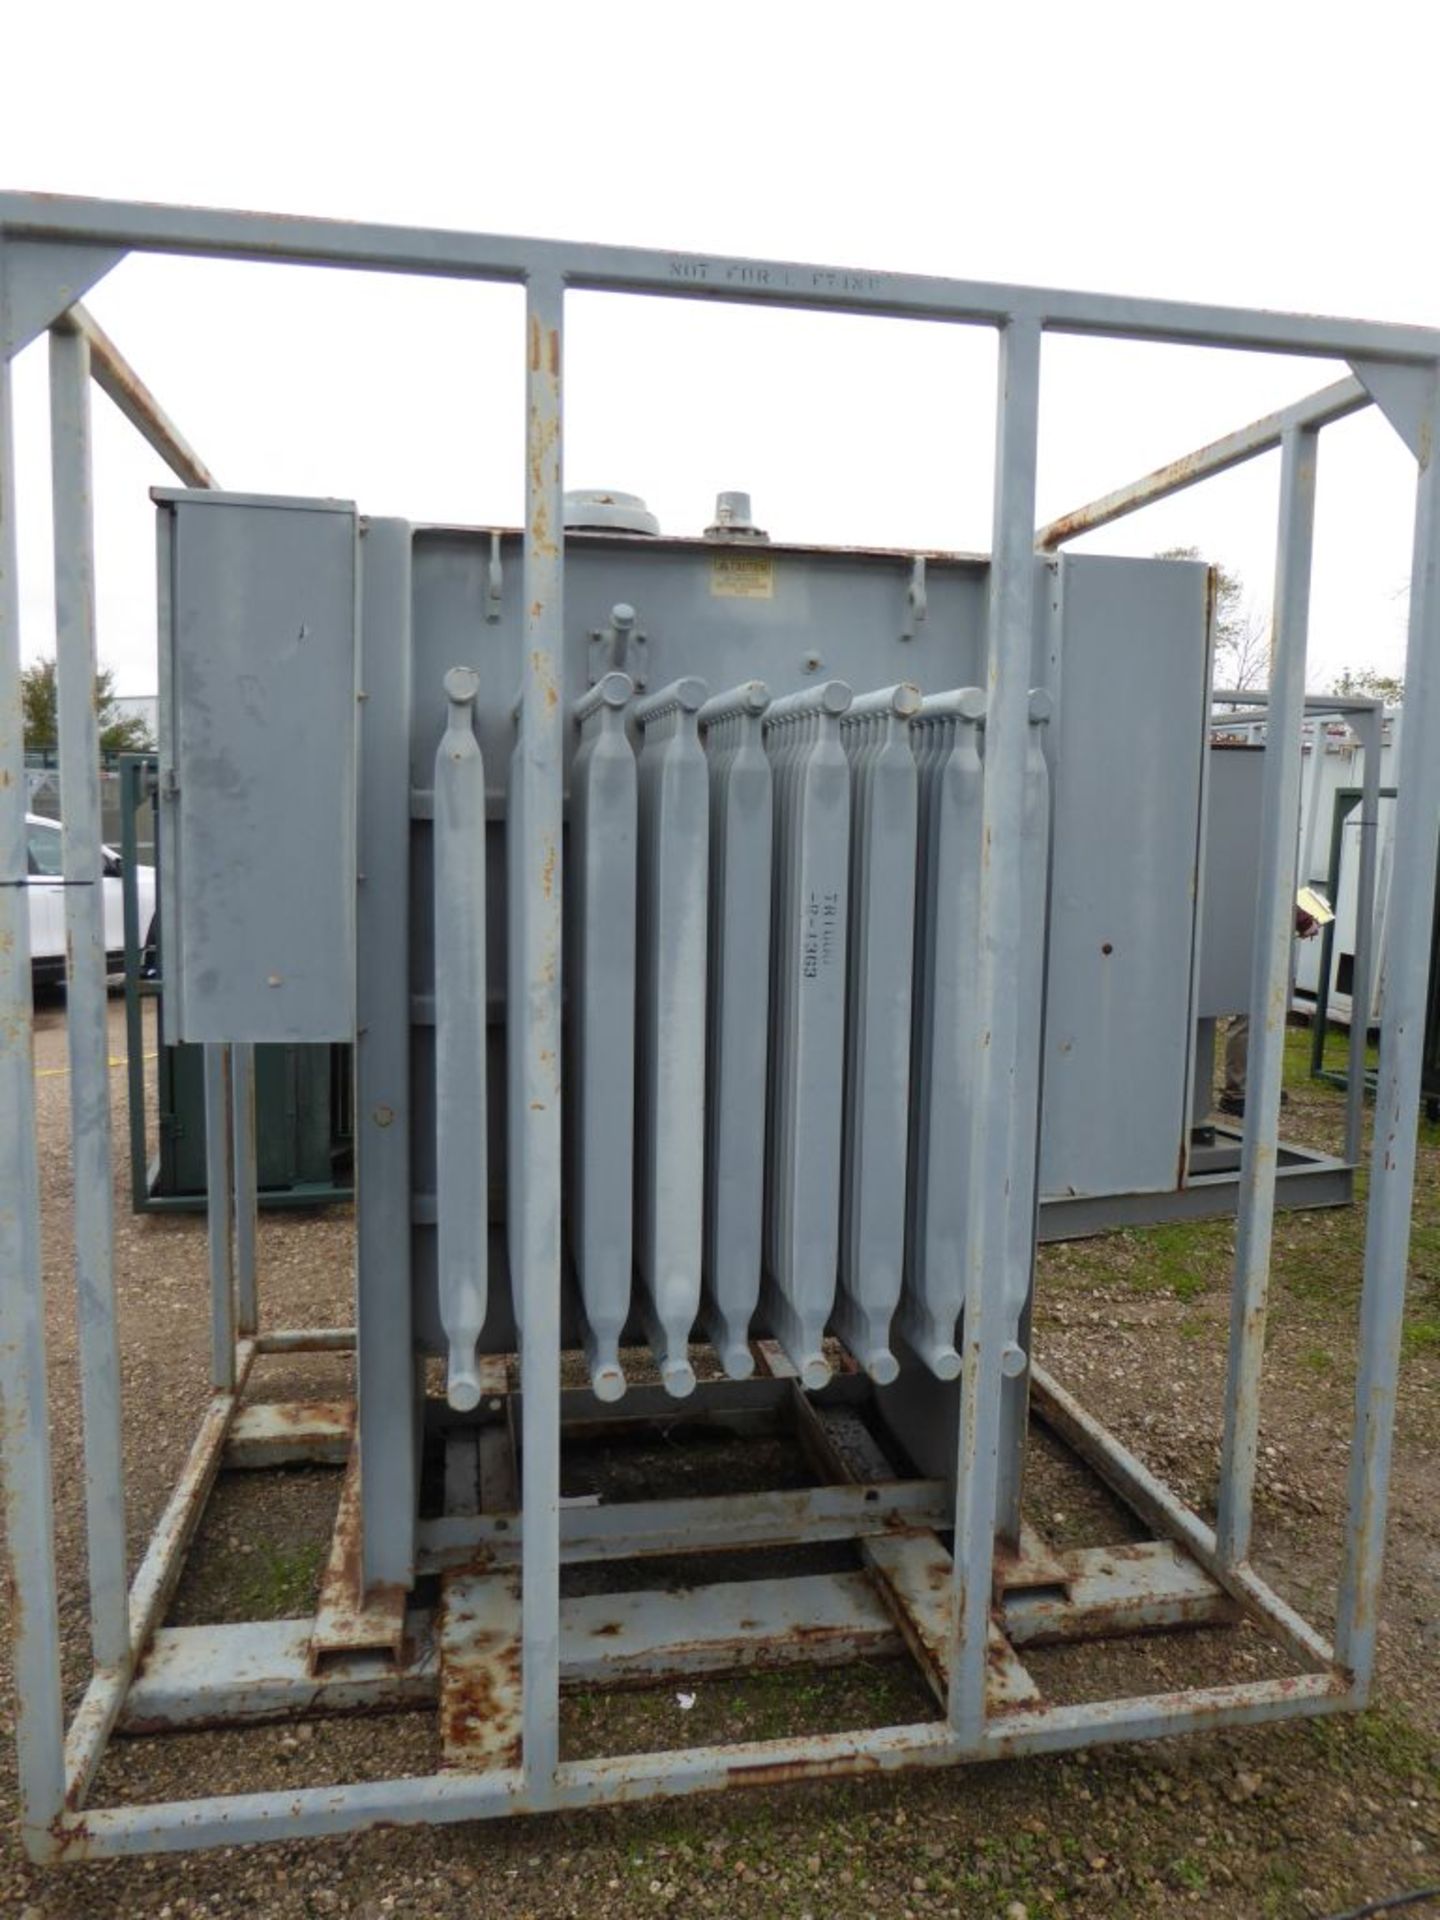 GE 1,000 KVA Transformer | Oil Report Included - See Lot Pictures - Bild 4 aus 12